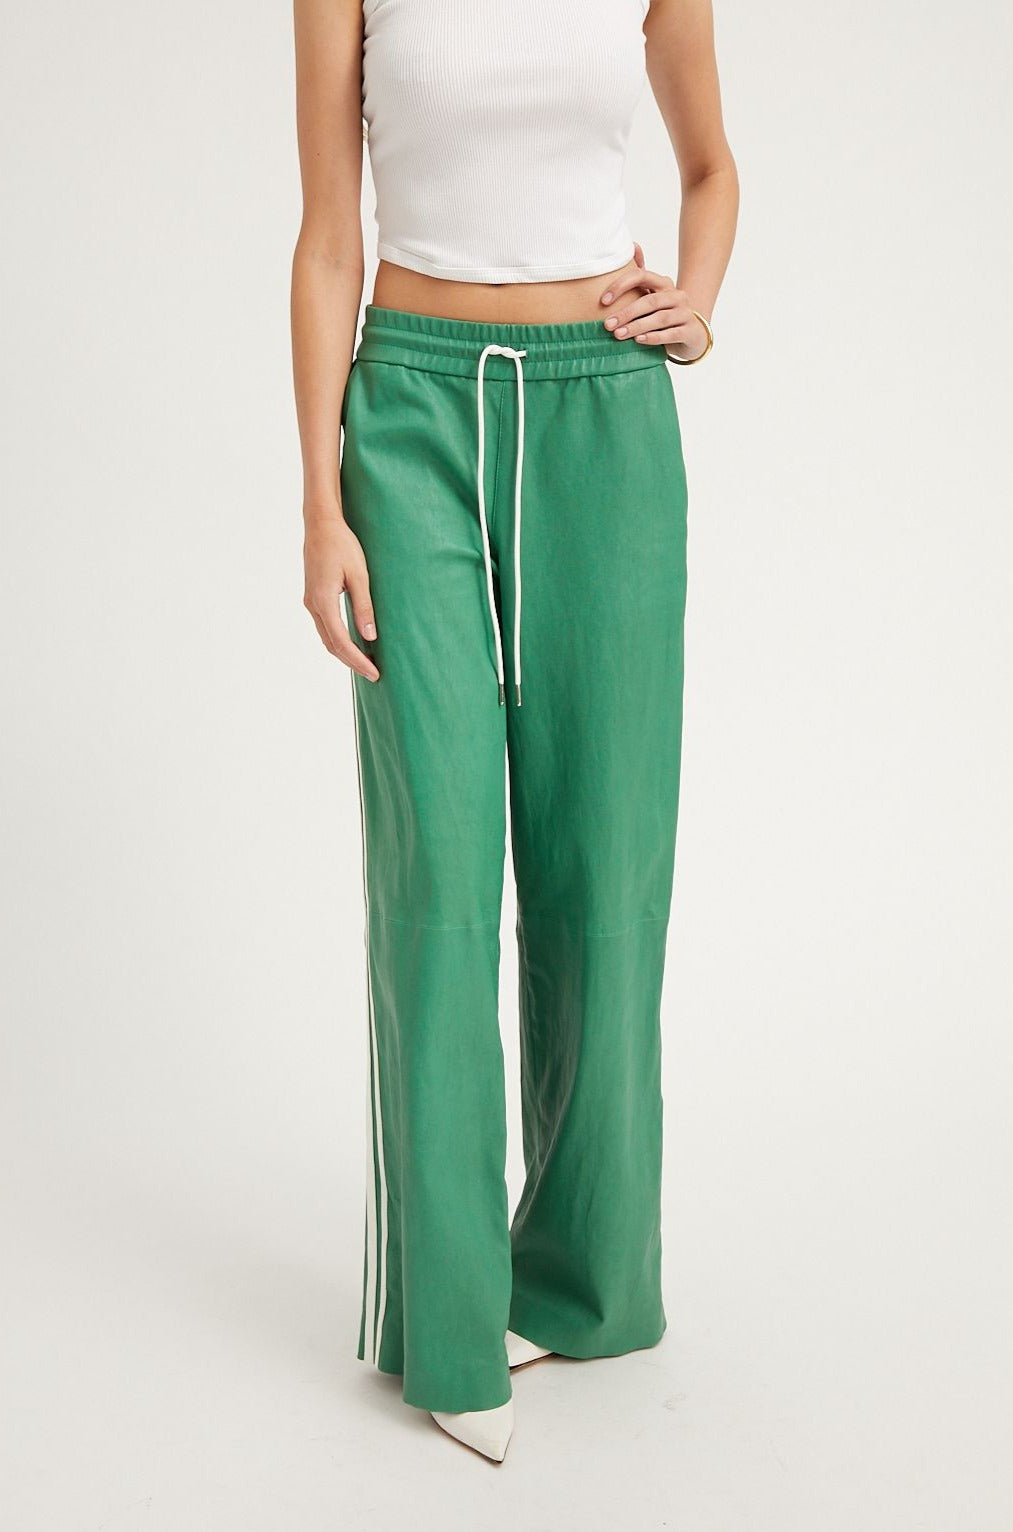 Evergreen Leather Athletic Drawstring Pants